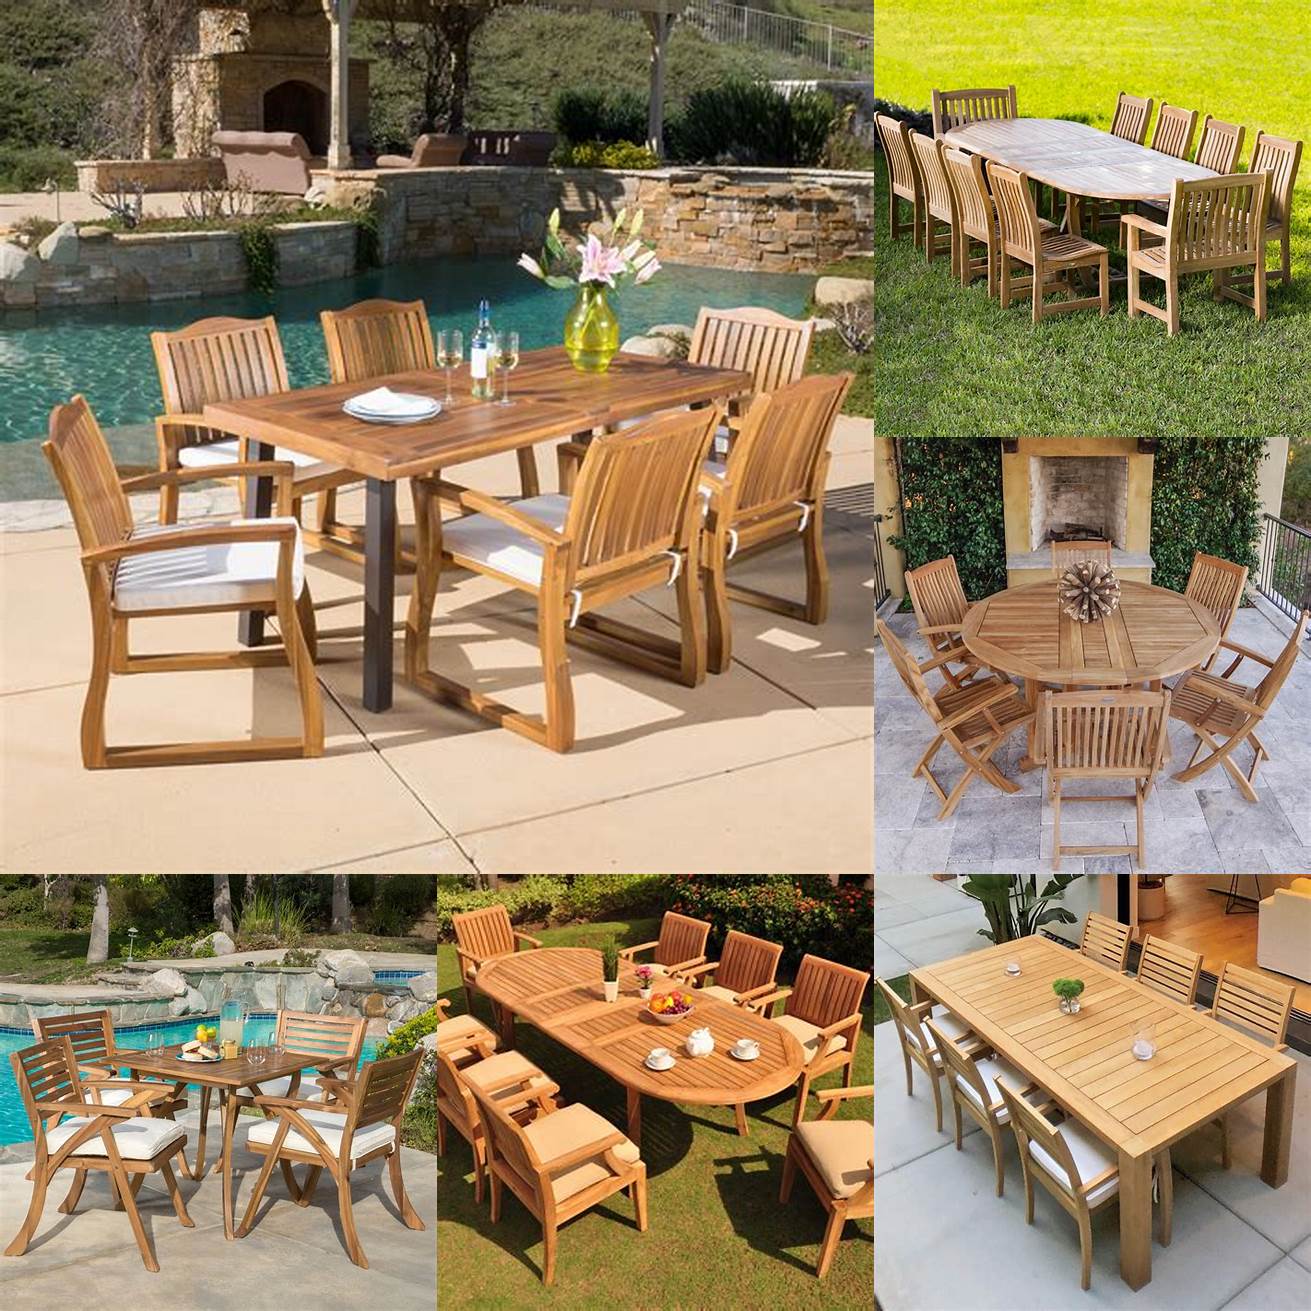 A Teak Patio Set In An Outdoor Dining Room